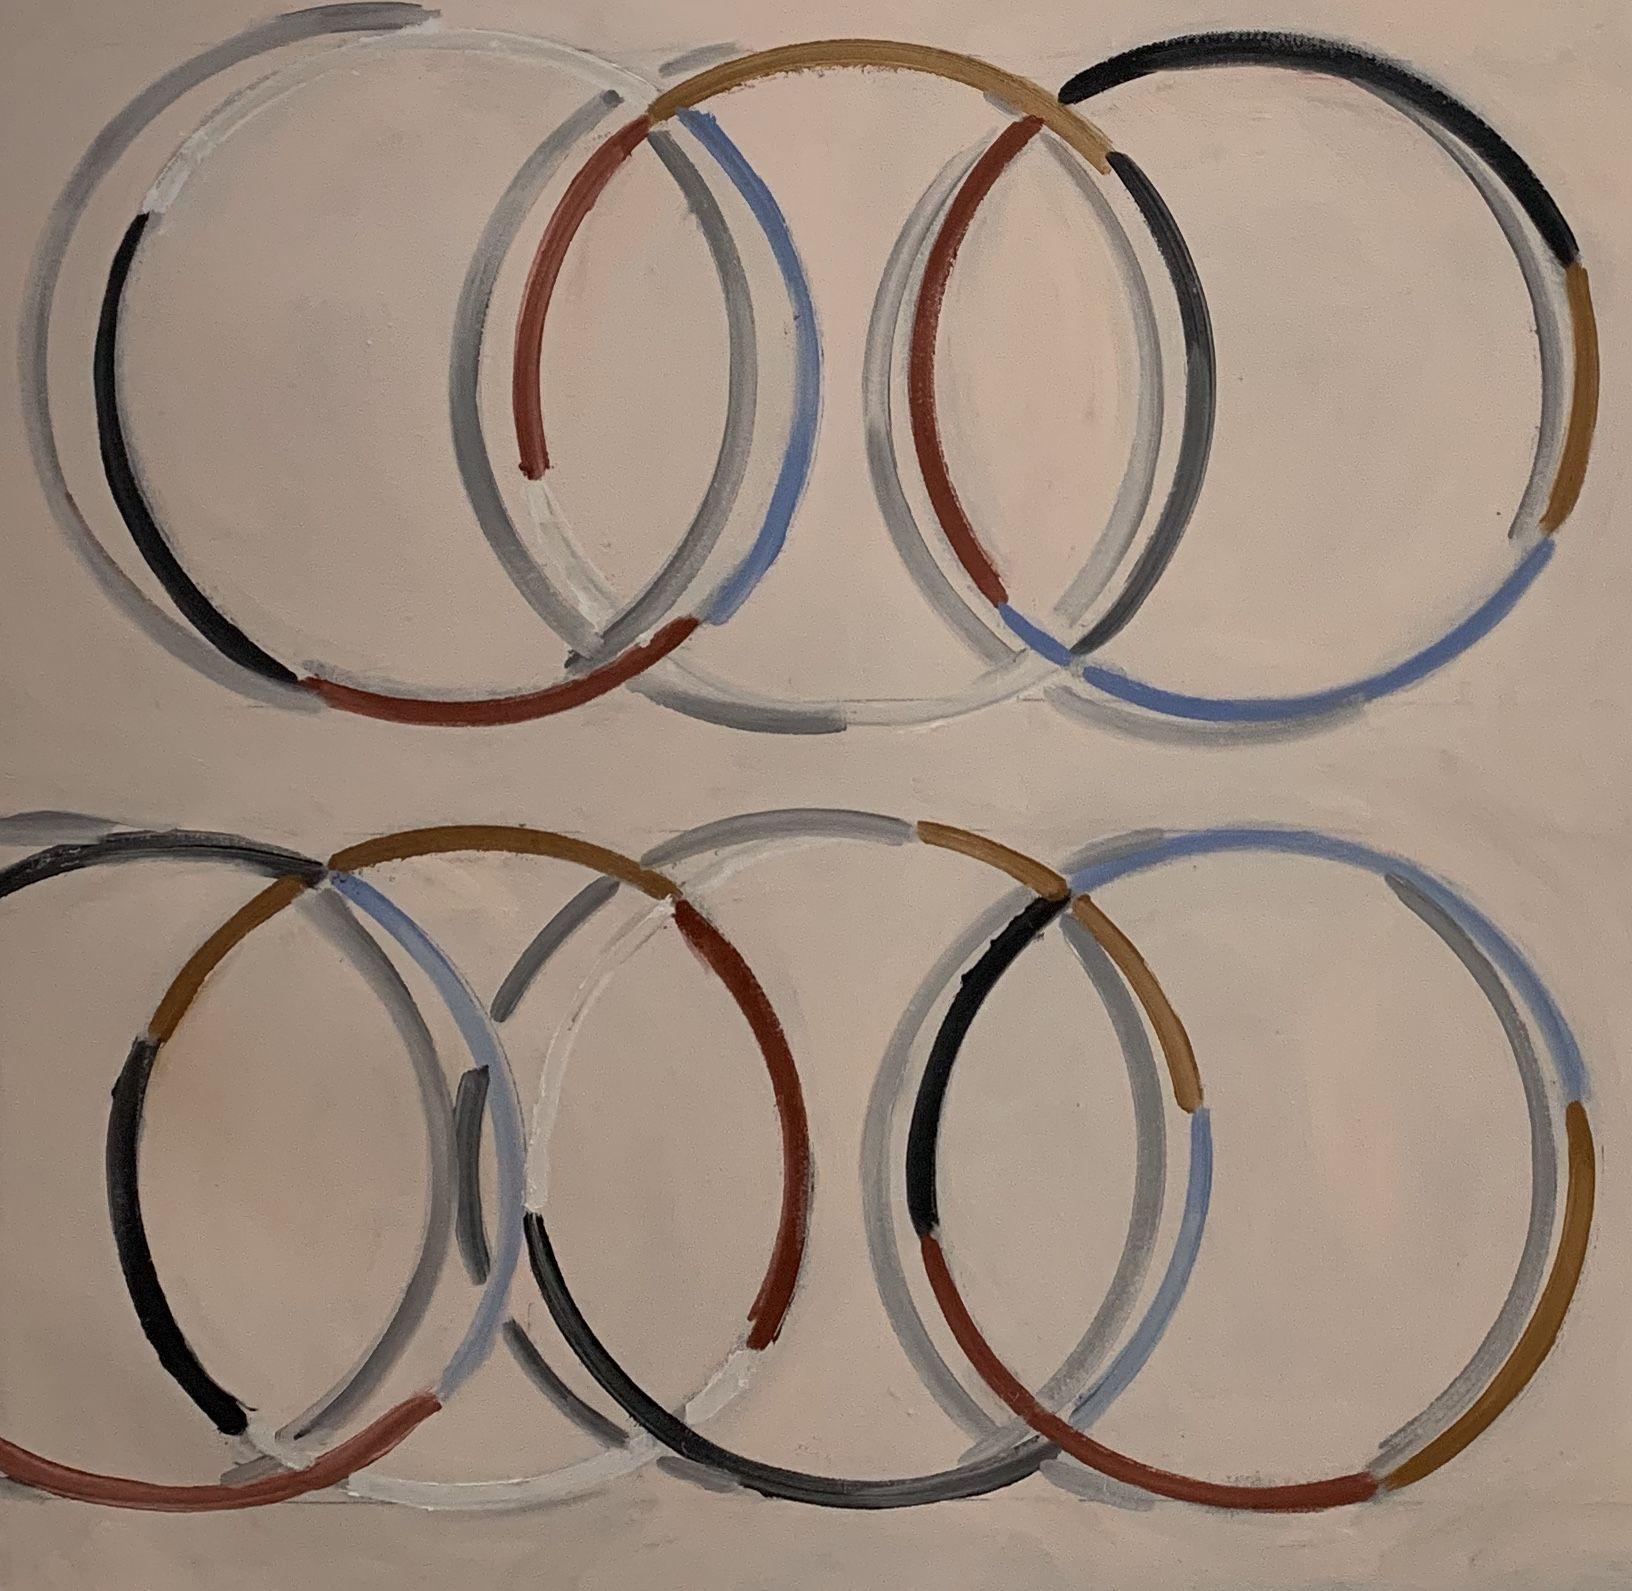 Spro Gyro 2 explores the placment of circles against a beige background.  The painting has a limited color palette, which shows the interplay of circular shapes and their shadows.  :: Painting :: Abstract :: This piece comes with an official